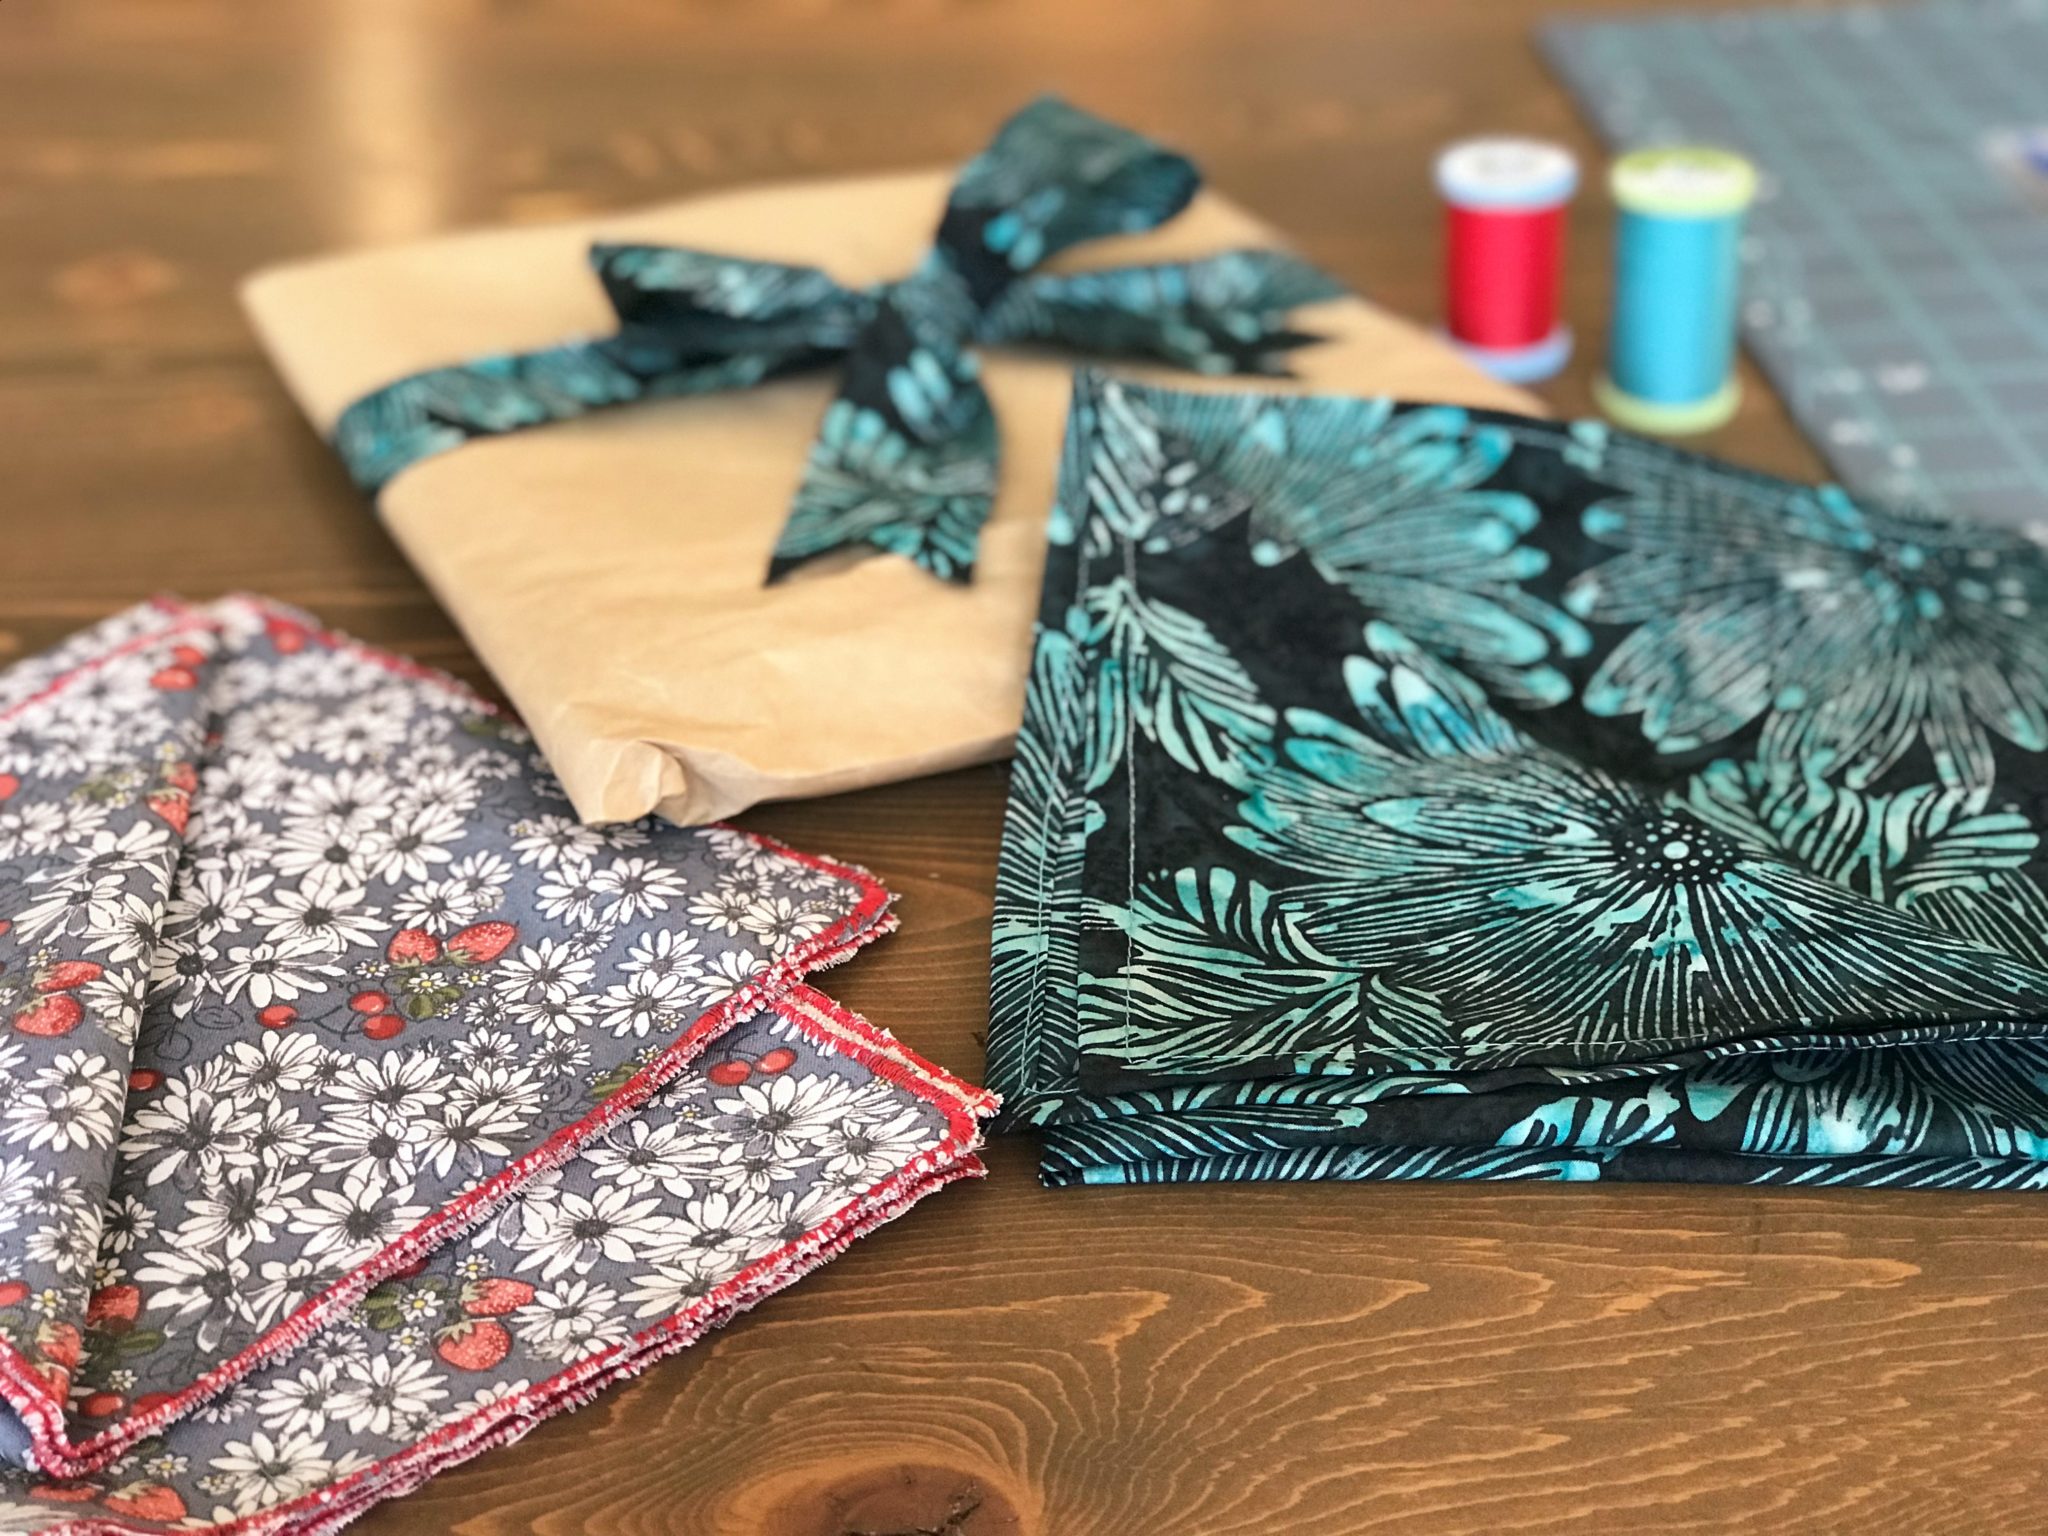 Two sets of cloth napkins and a wrapped present sit on a table